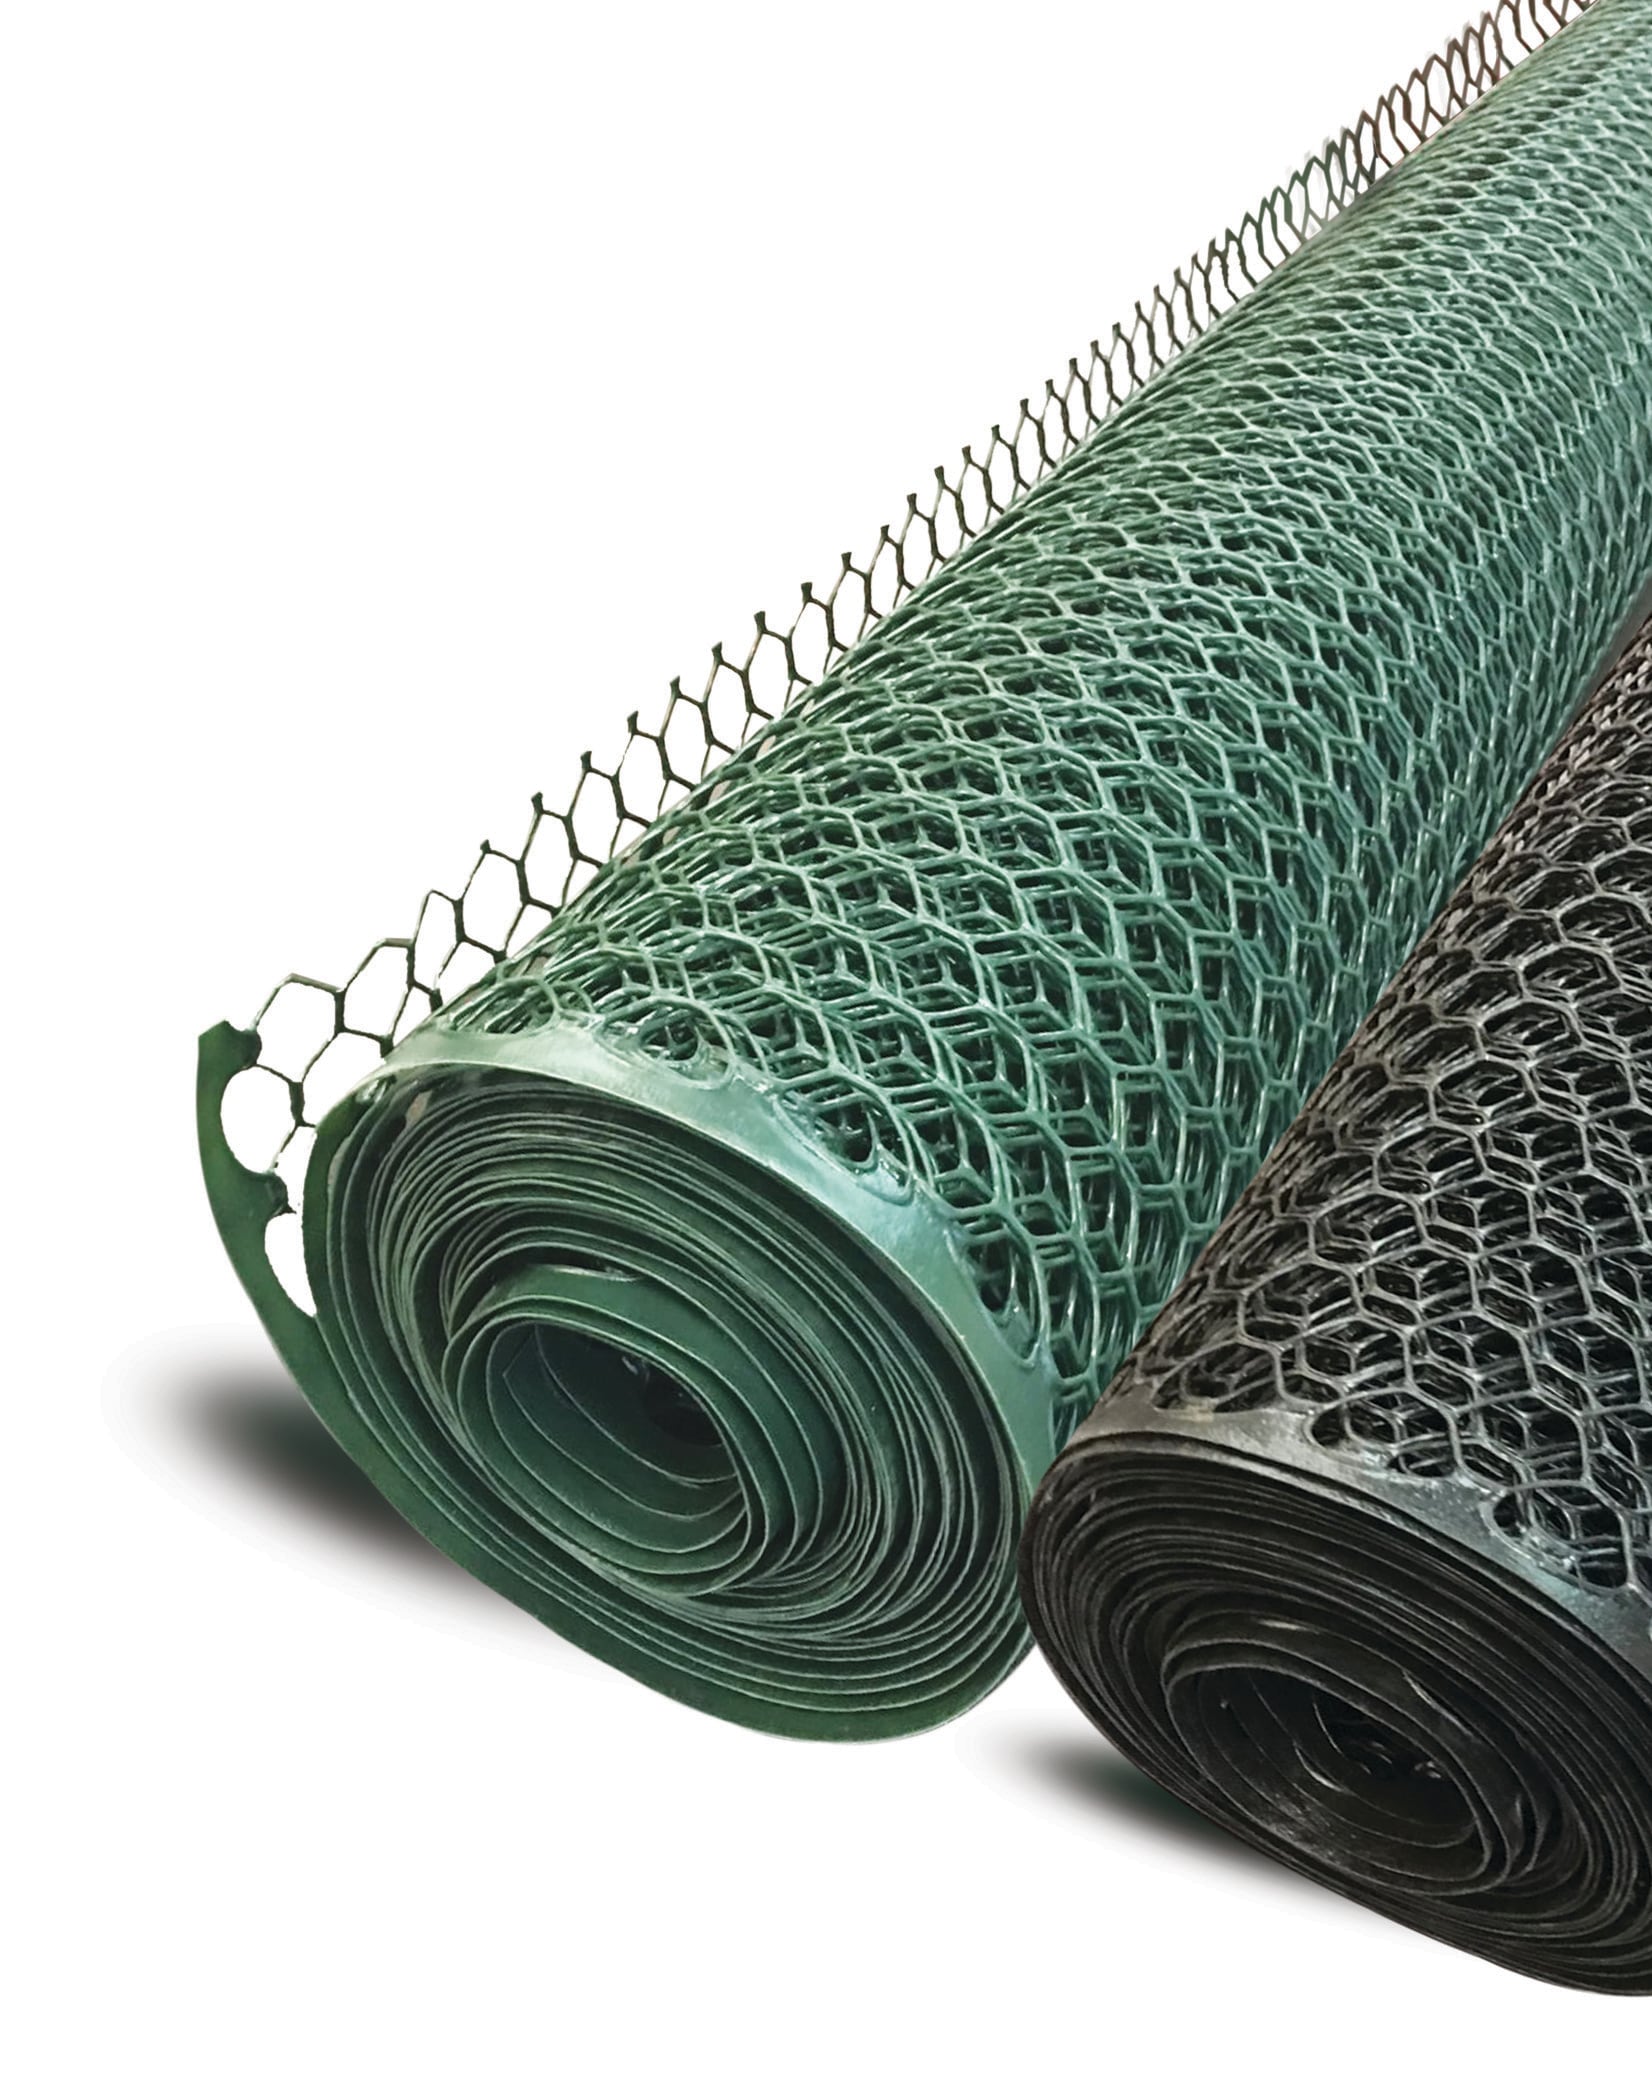 Poultry Hex Netting, Green, 3 ft. x 25 ft